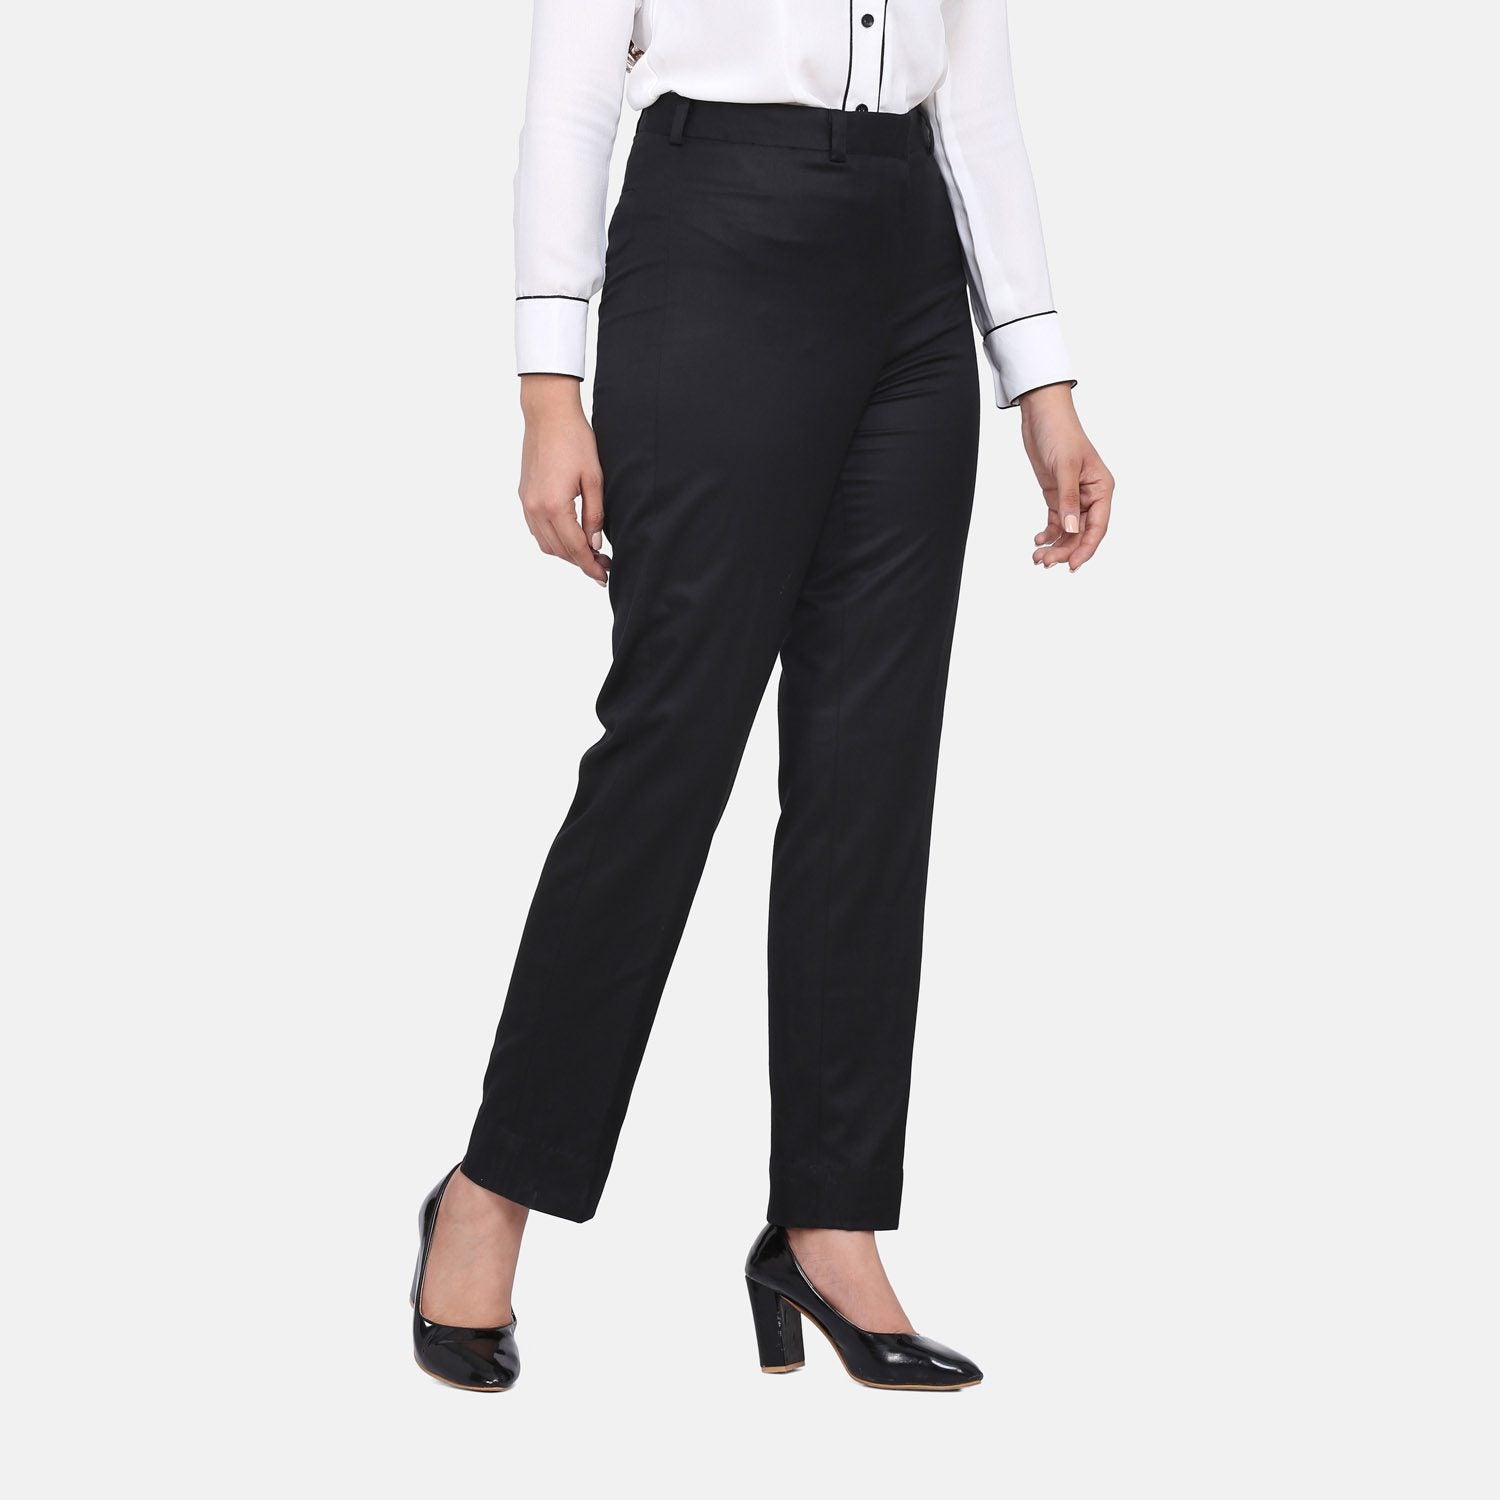 Buy Broadstar Women Black Wide Leg Loose Fit High-Rise Stretchable Formal  Trousers(Blk_3) at Amazon.in